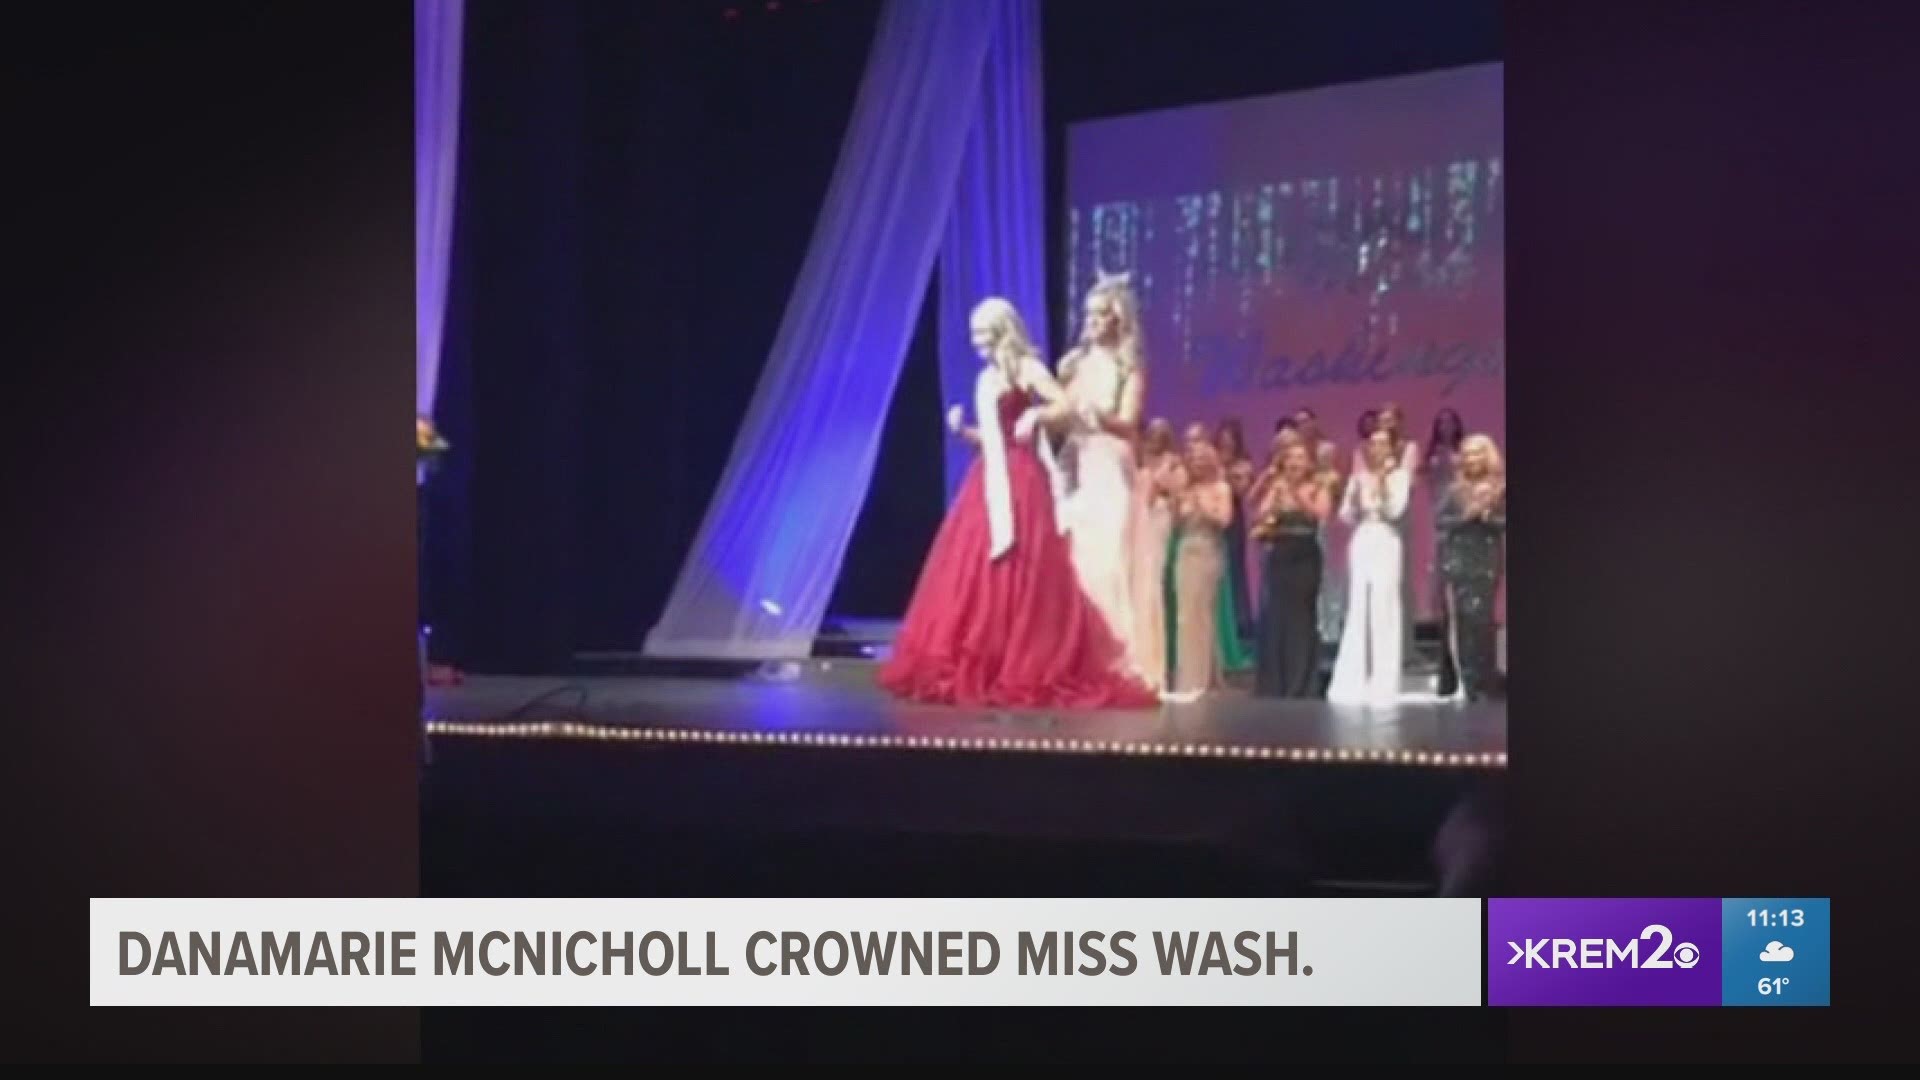 KREM 2's Danamaris McNicholl was crowned Miss Washington 2018! She'll be competing for the Miss America title in September. Congratulations Danamarie!